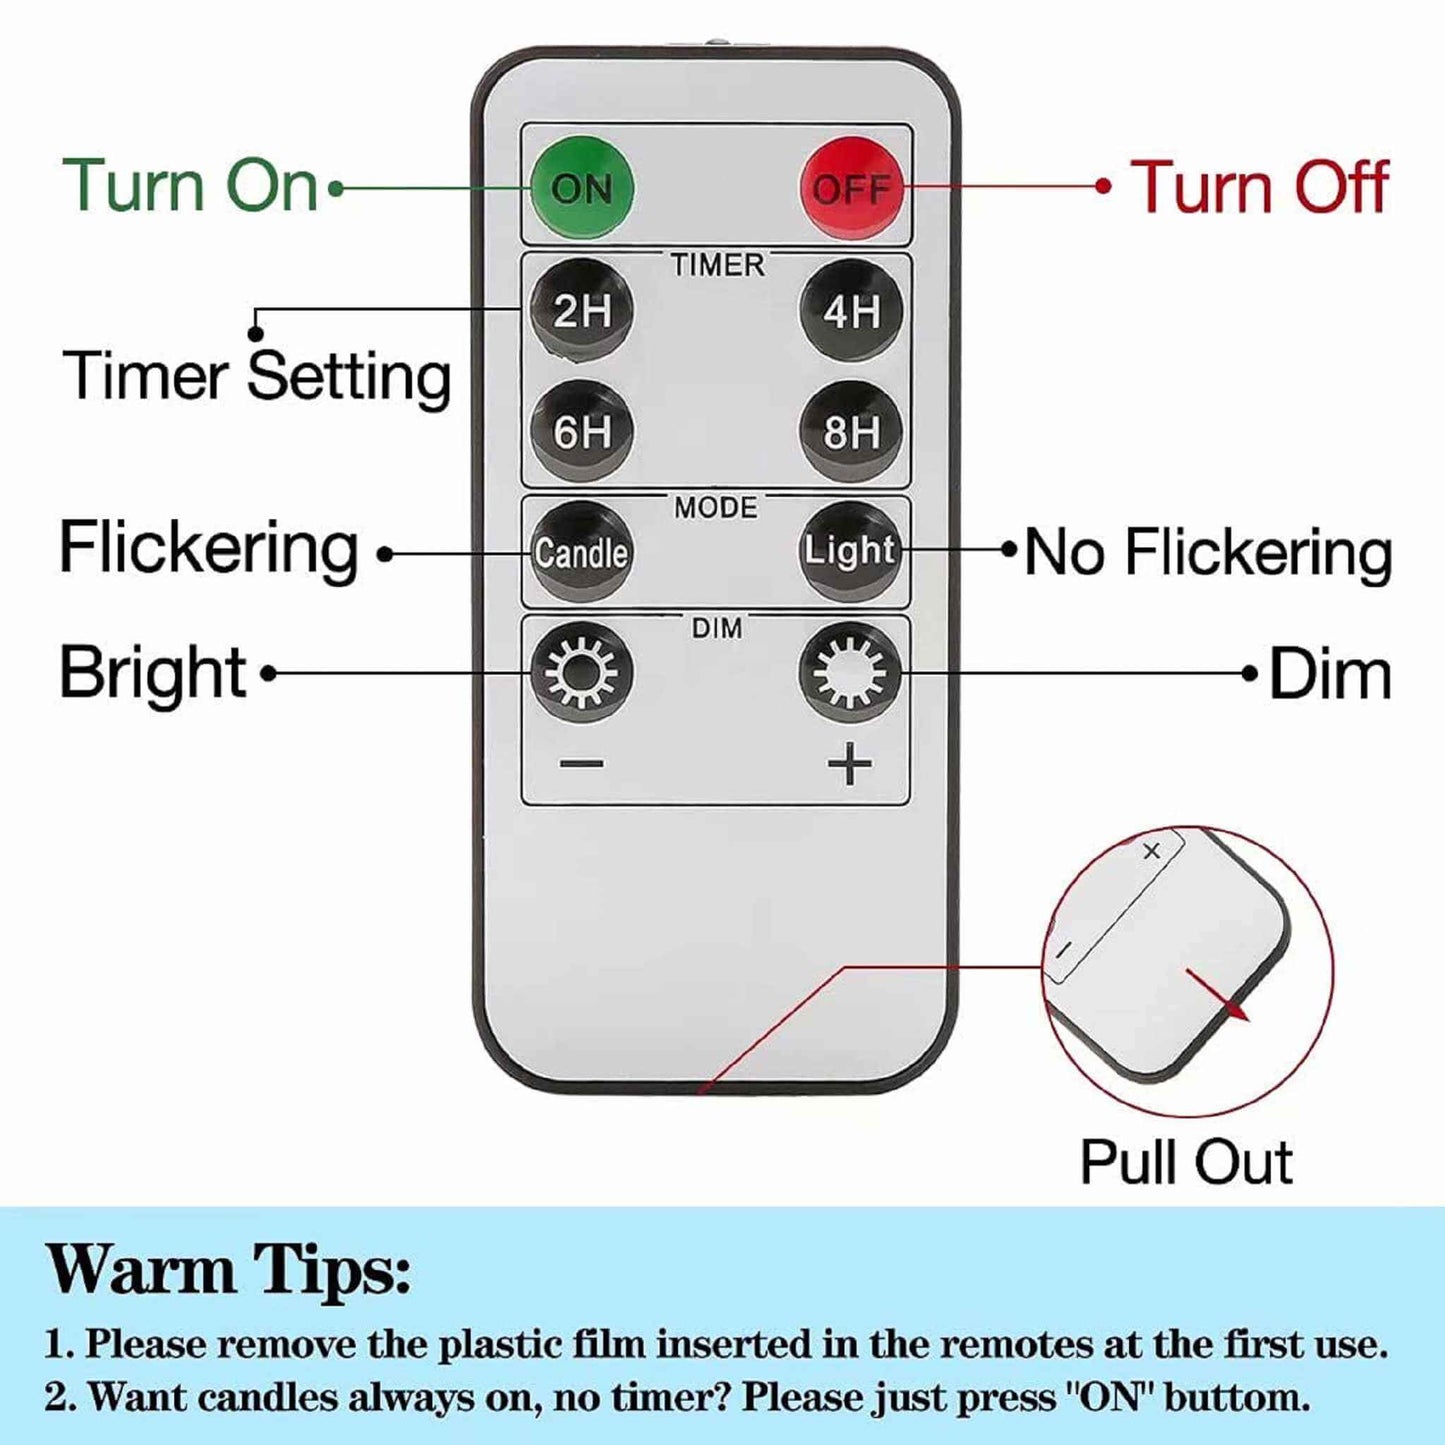 Introduce the functions of each button of the ten-button remote control dedicated to flameless candles